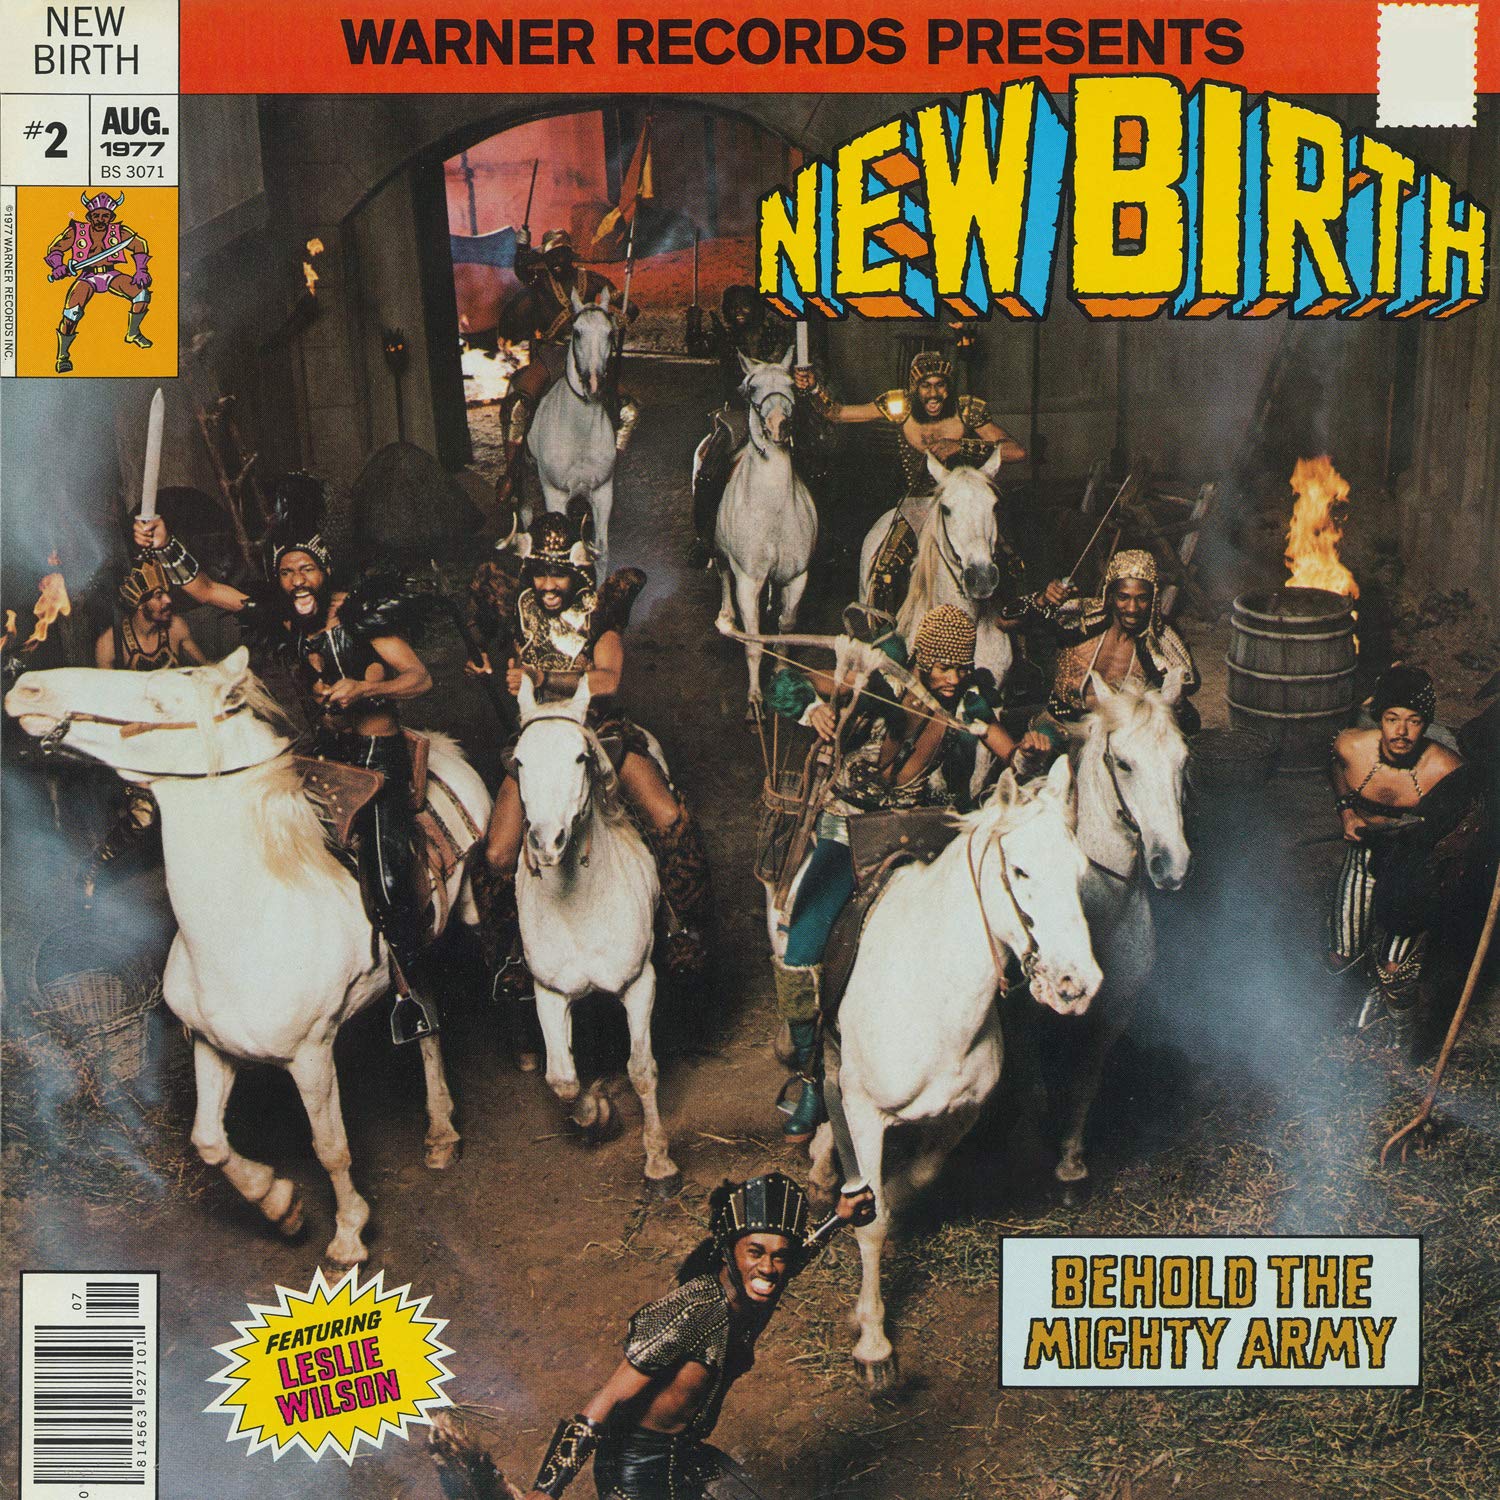 New Birth – Behold The Mighty Army (1977) [FLAC]